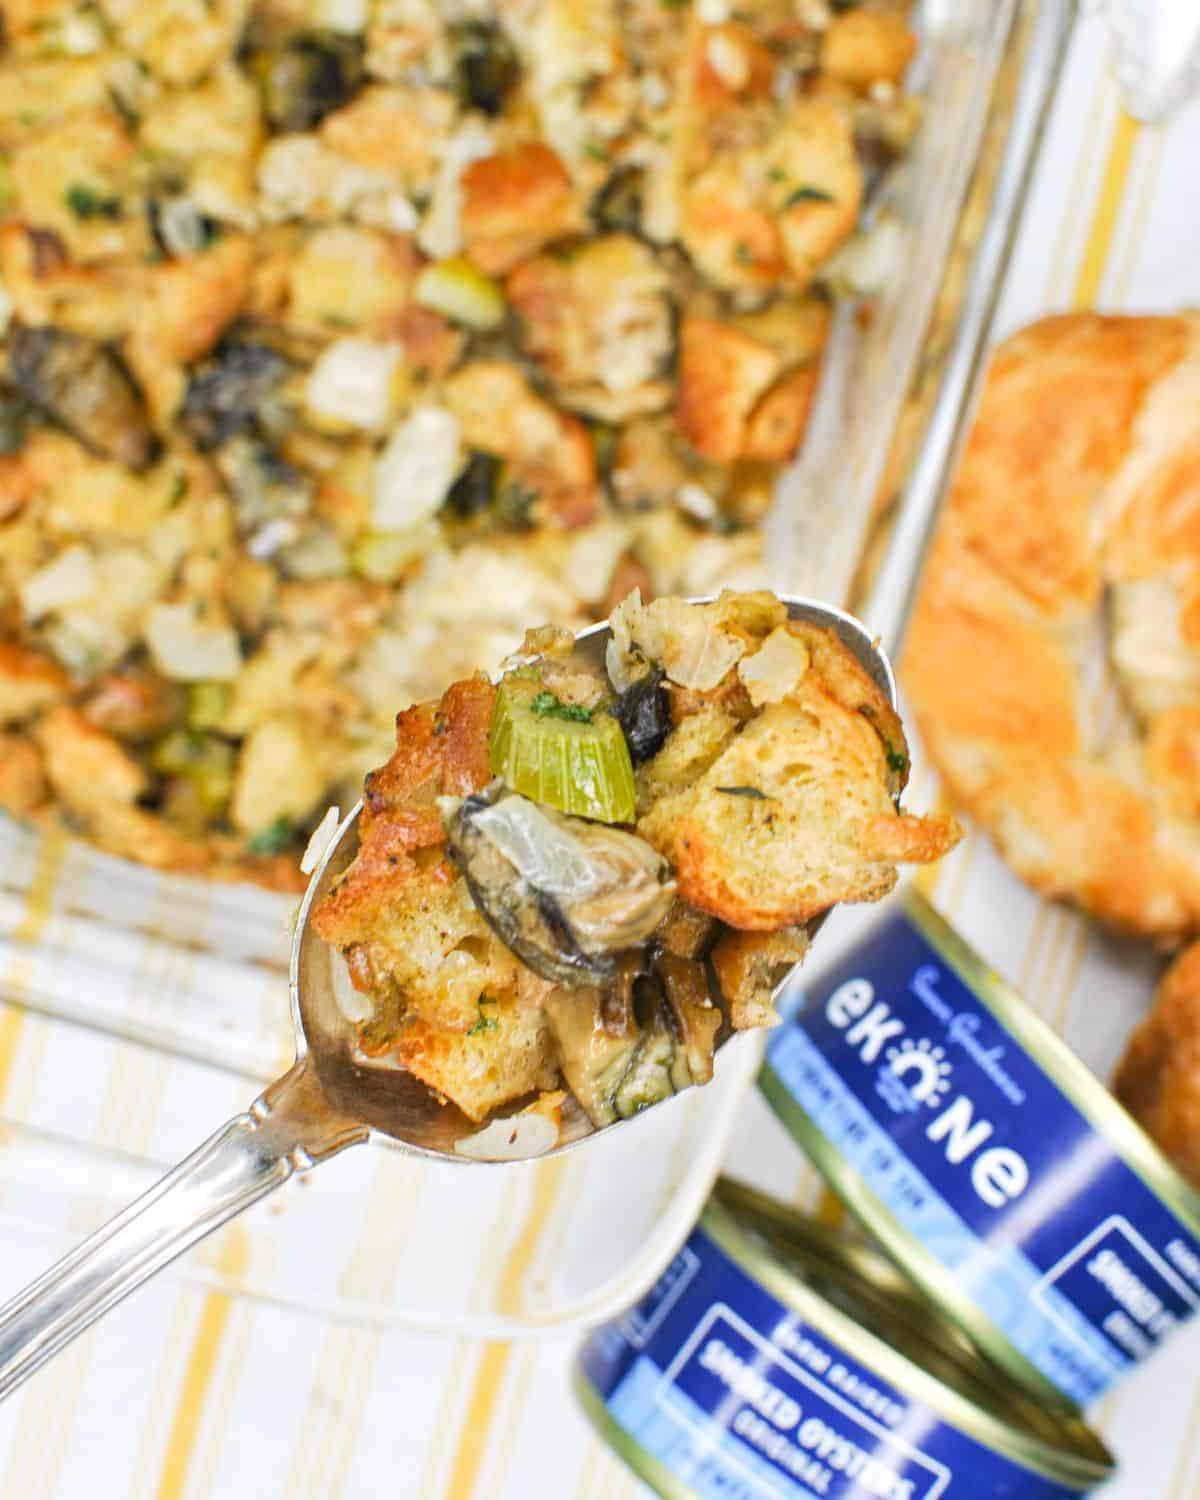 spoonful of seafood croissant stuffing with ekone canned smoked oysters to the side along with the stuffing dish